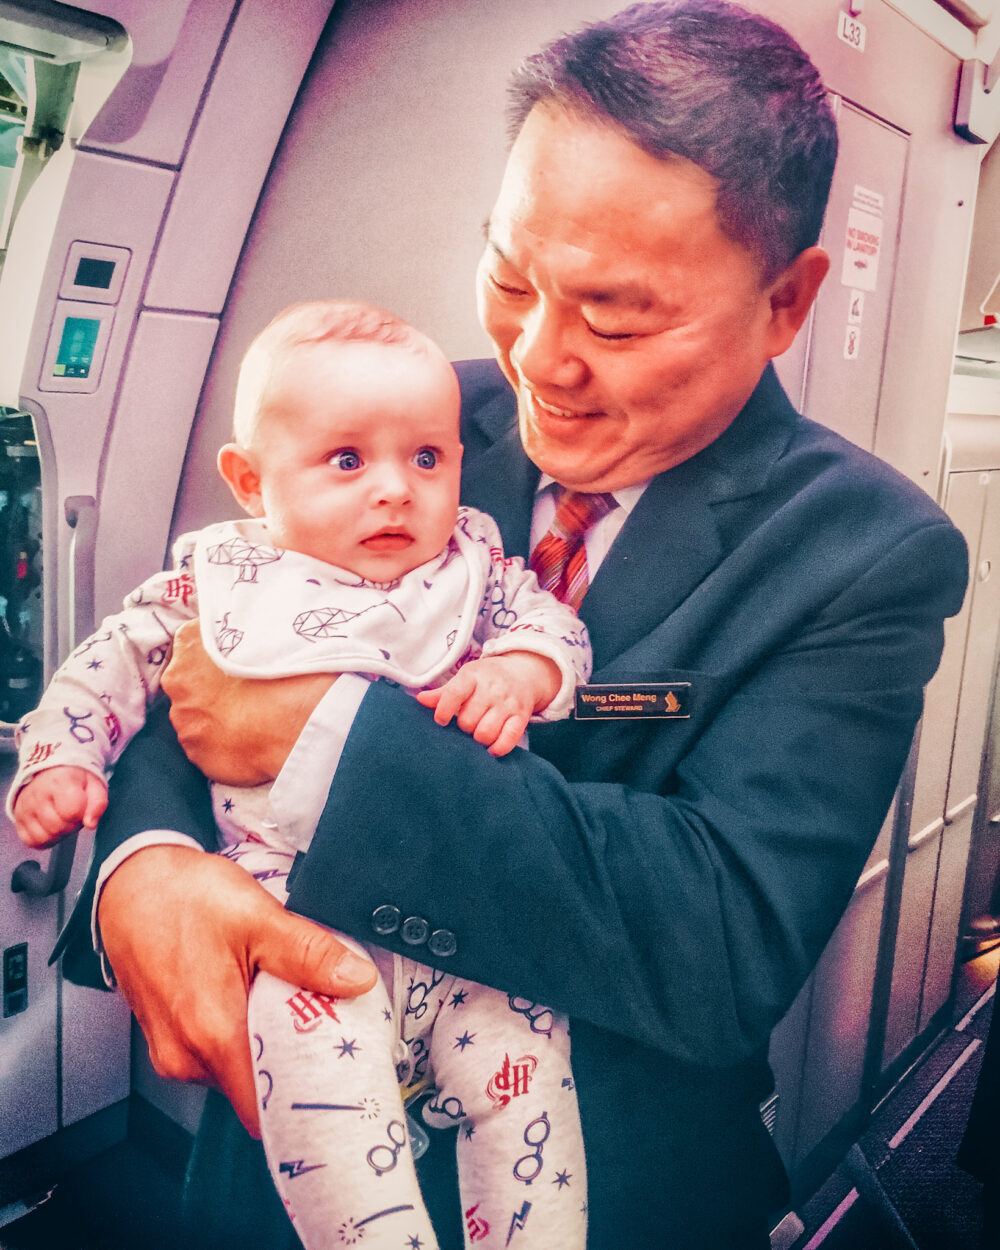 PACKING LIST FOR FLYING WITH A BABY: GEMMA AND GEORGE